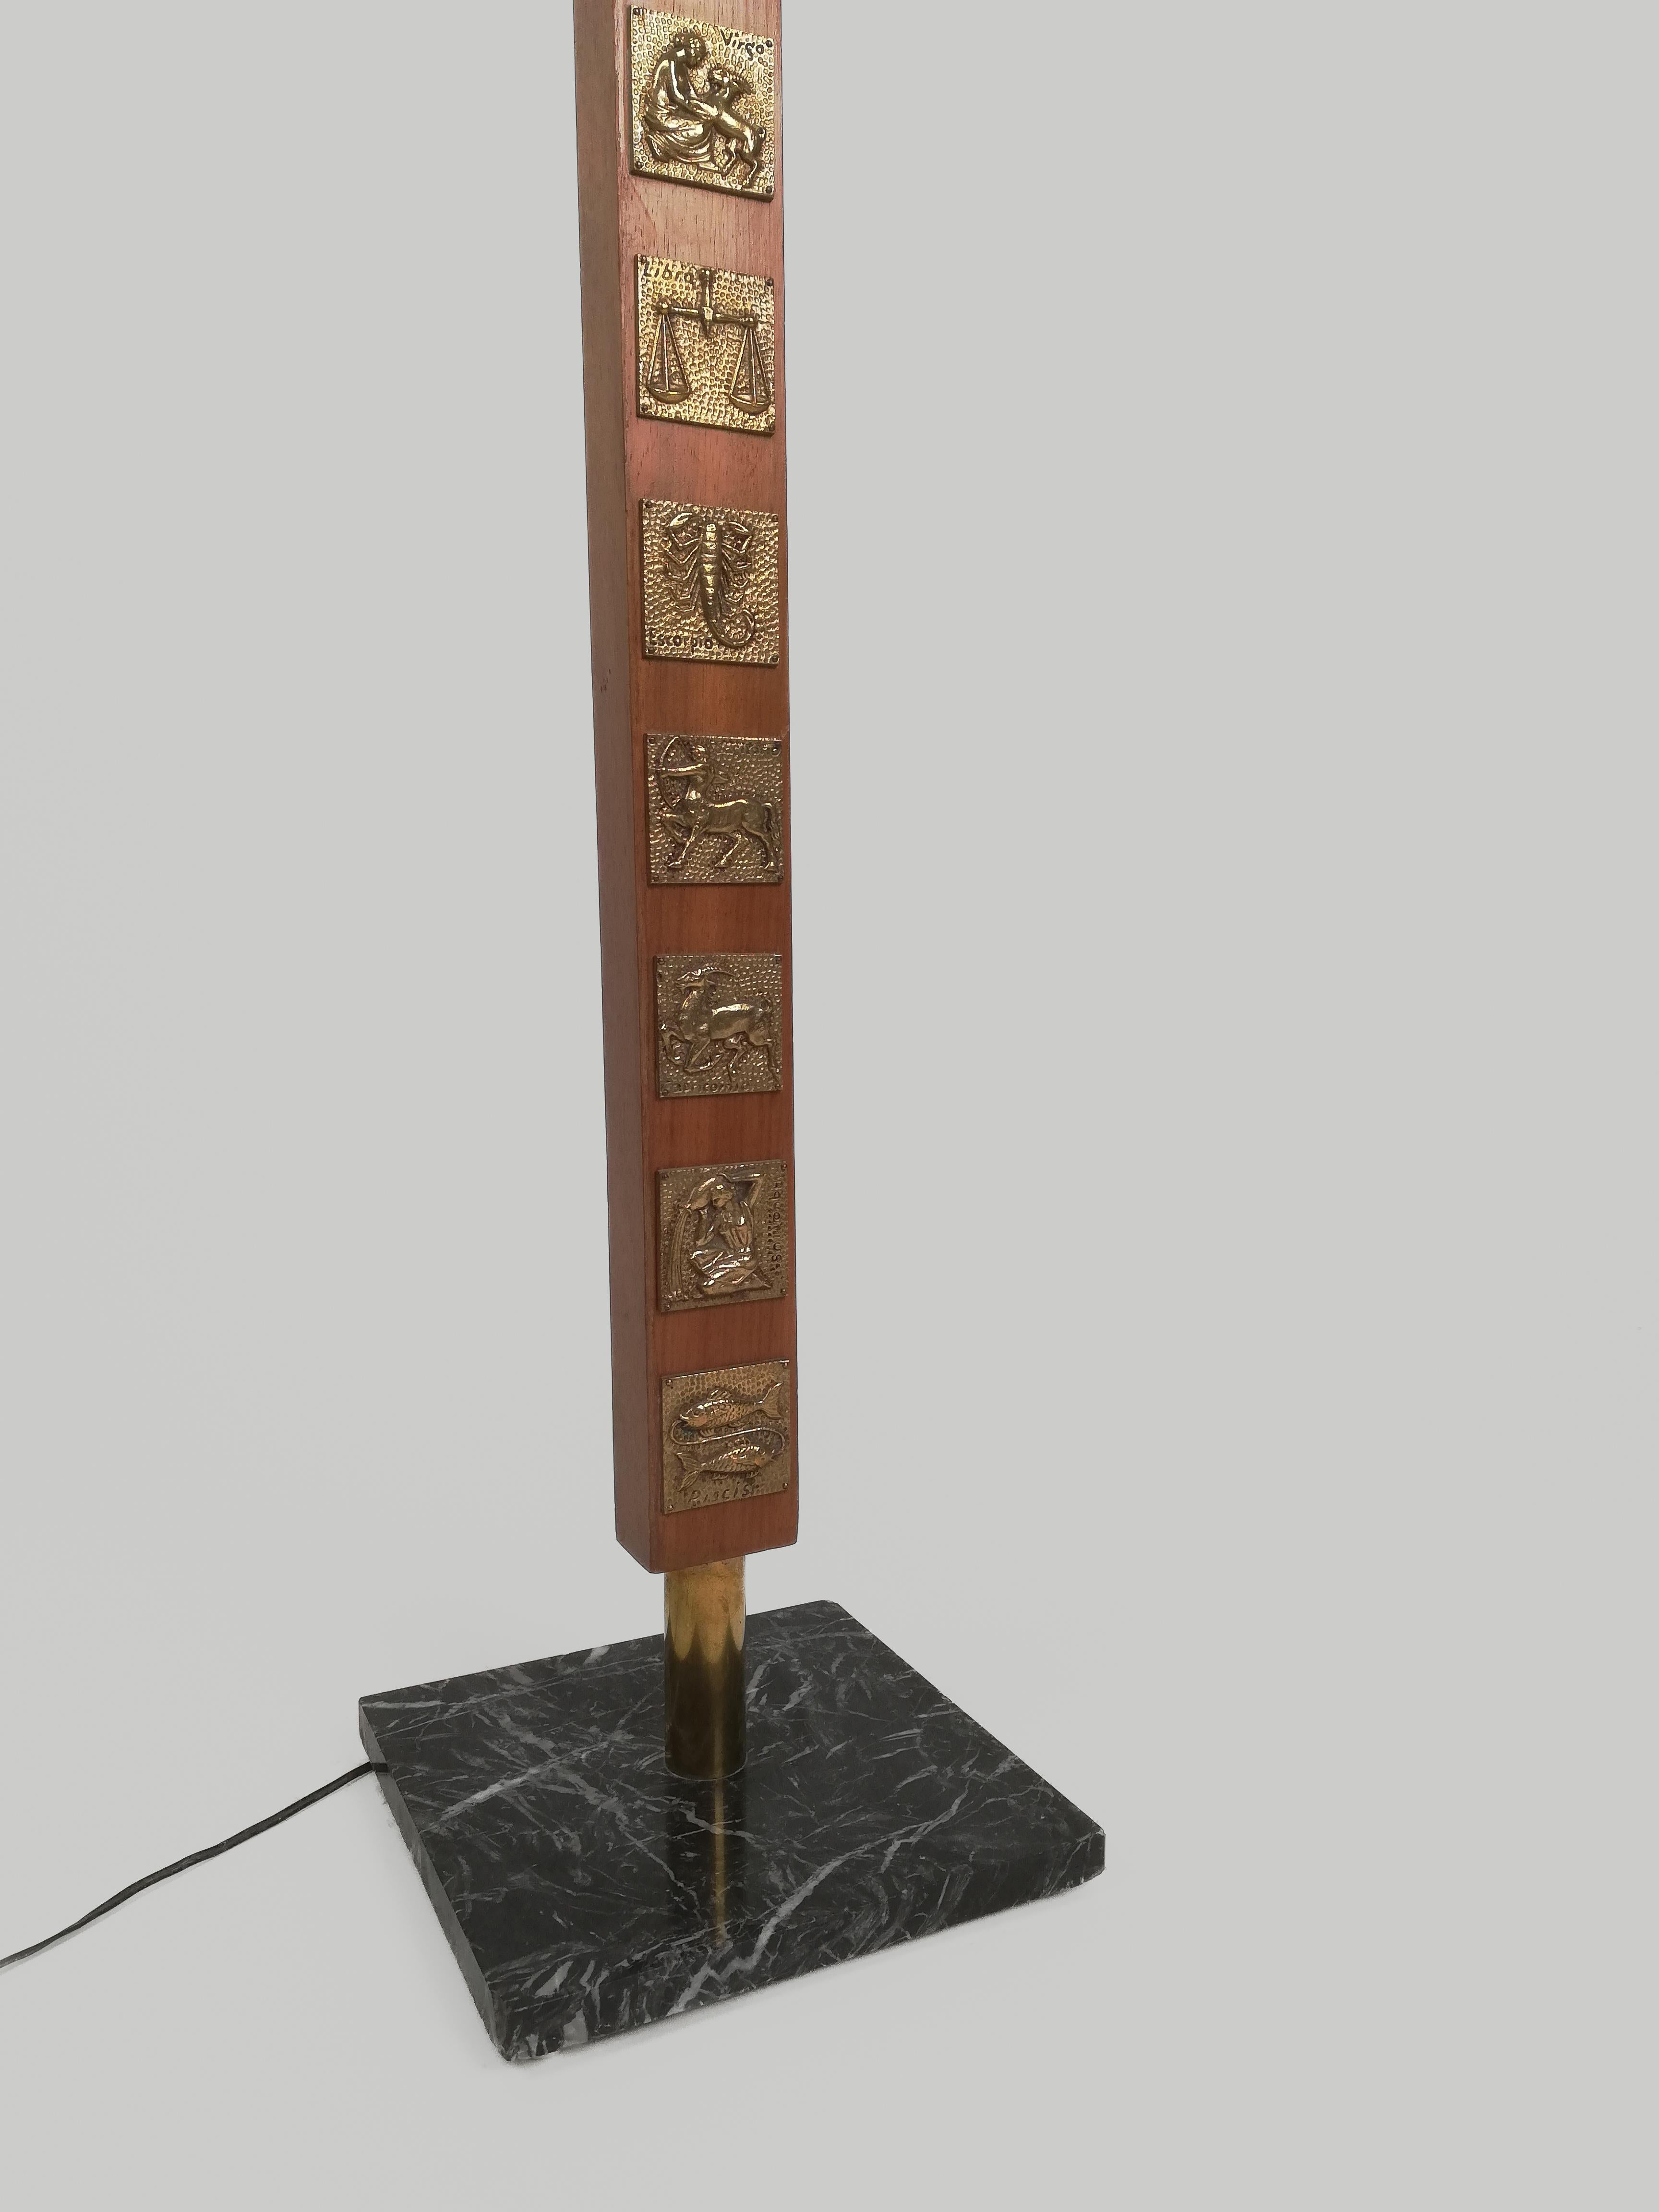 A midcentury floor lamp probably made in Italy between the 1960s and the 1970s.
The solid wood structure is decorated with 12 gilded tiles depicting the zodiac signs.
The decorative theme and the style of the decoration recall the productions of